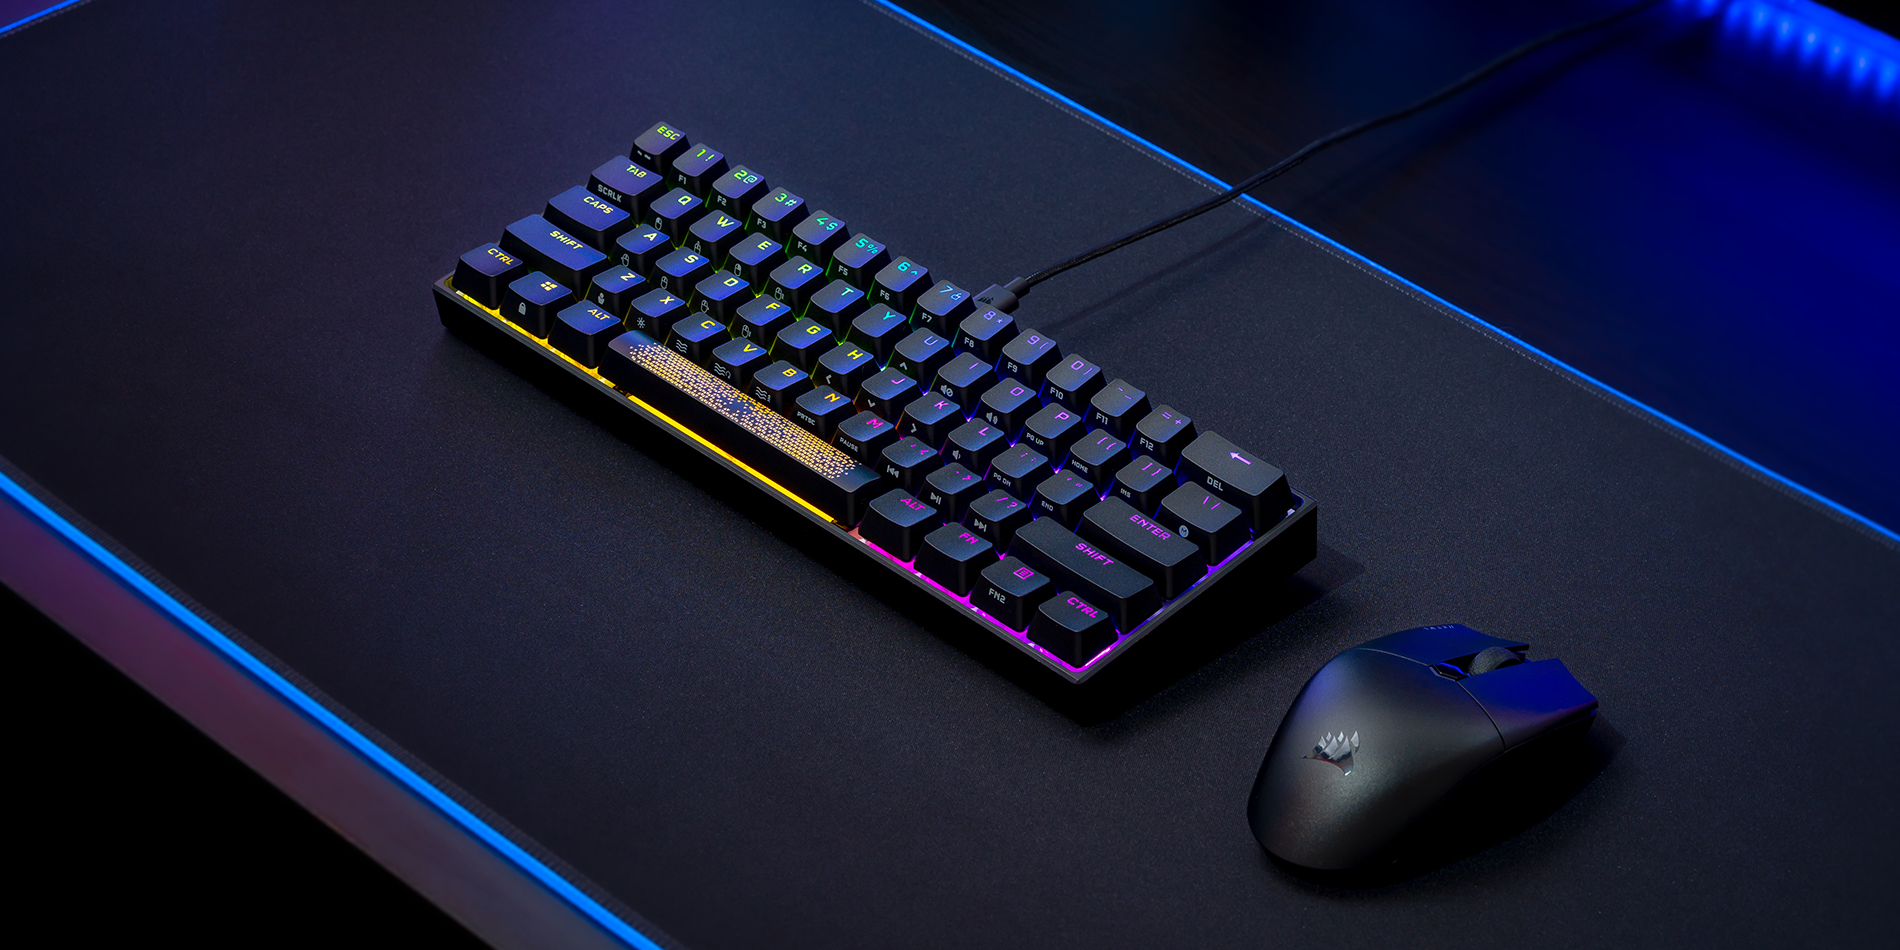 cowboy dræbe skotsk CORSAIR on Twitter: "60% keyboard, $20 off. Get our K65 RGB MINI for an  extra low price while supplies last! Sign up for two days of early access  to our US deals